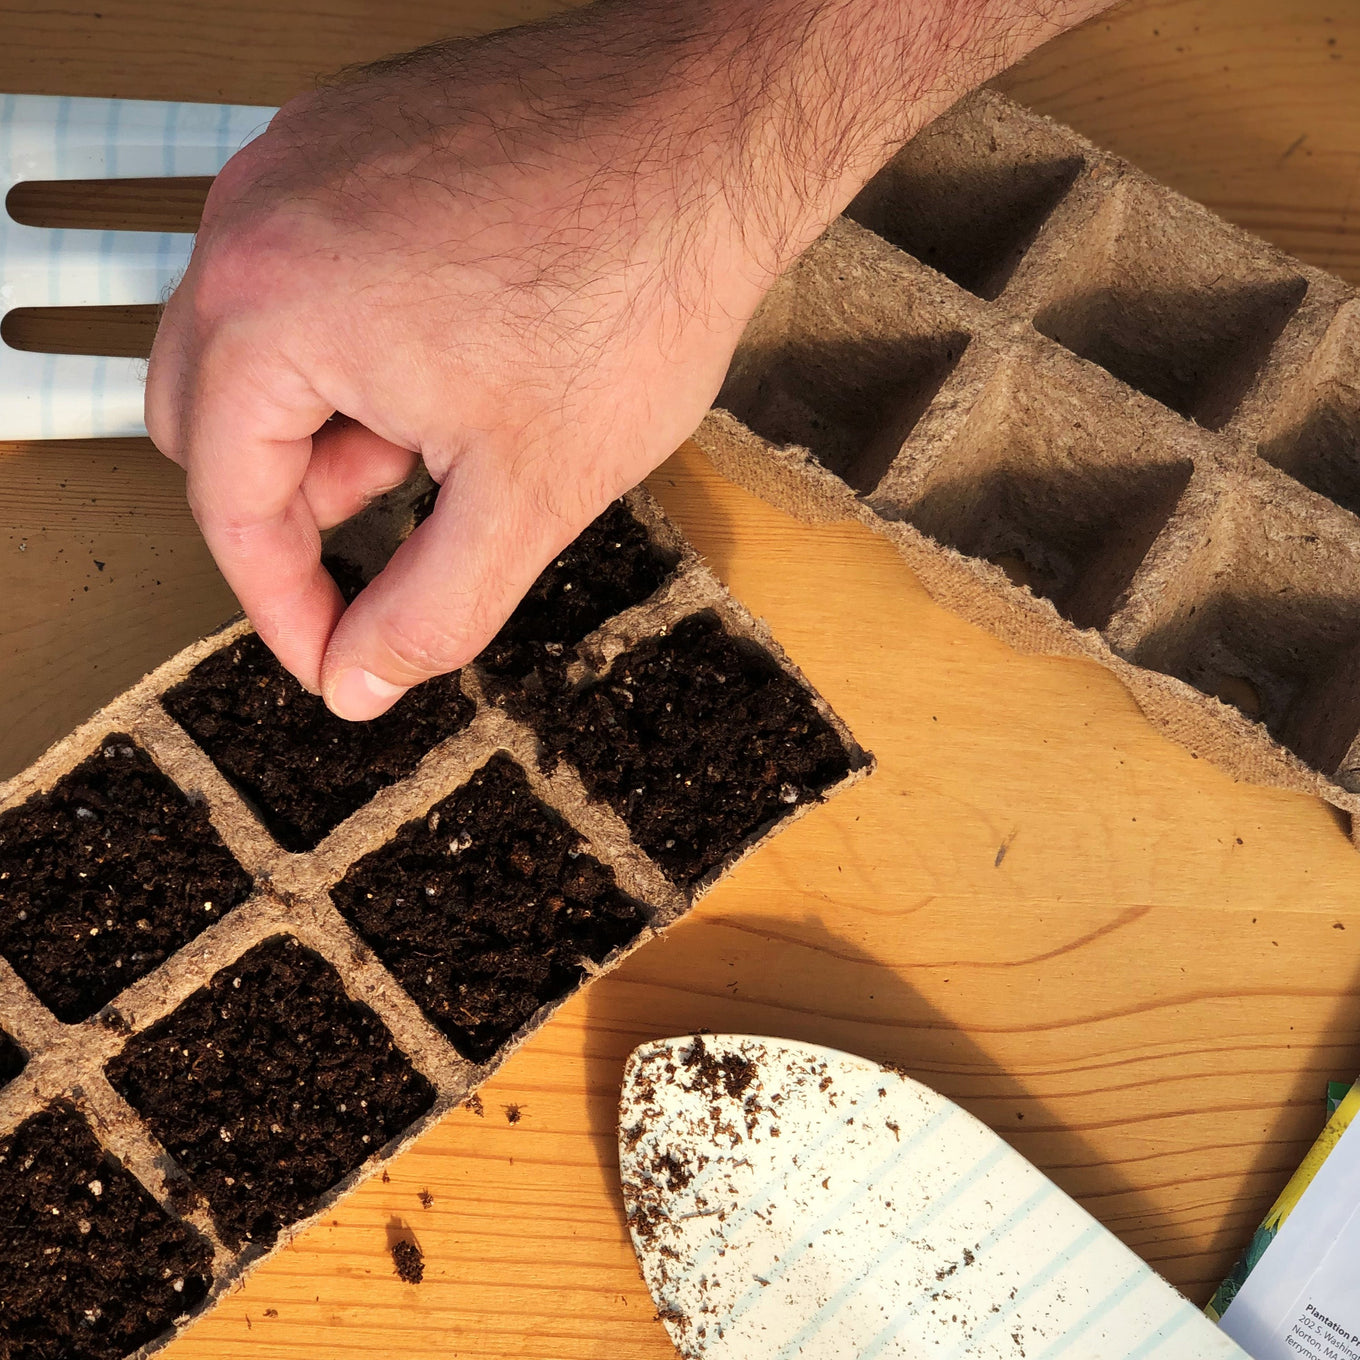 Start Big Boy Hybrid Tomato seeds in Jiffy biodegradable peat strip trays filled with Jiffy sowing mix.